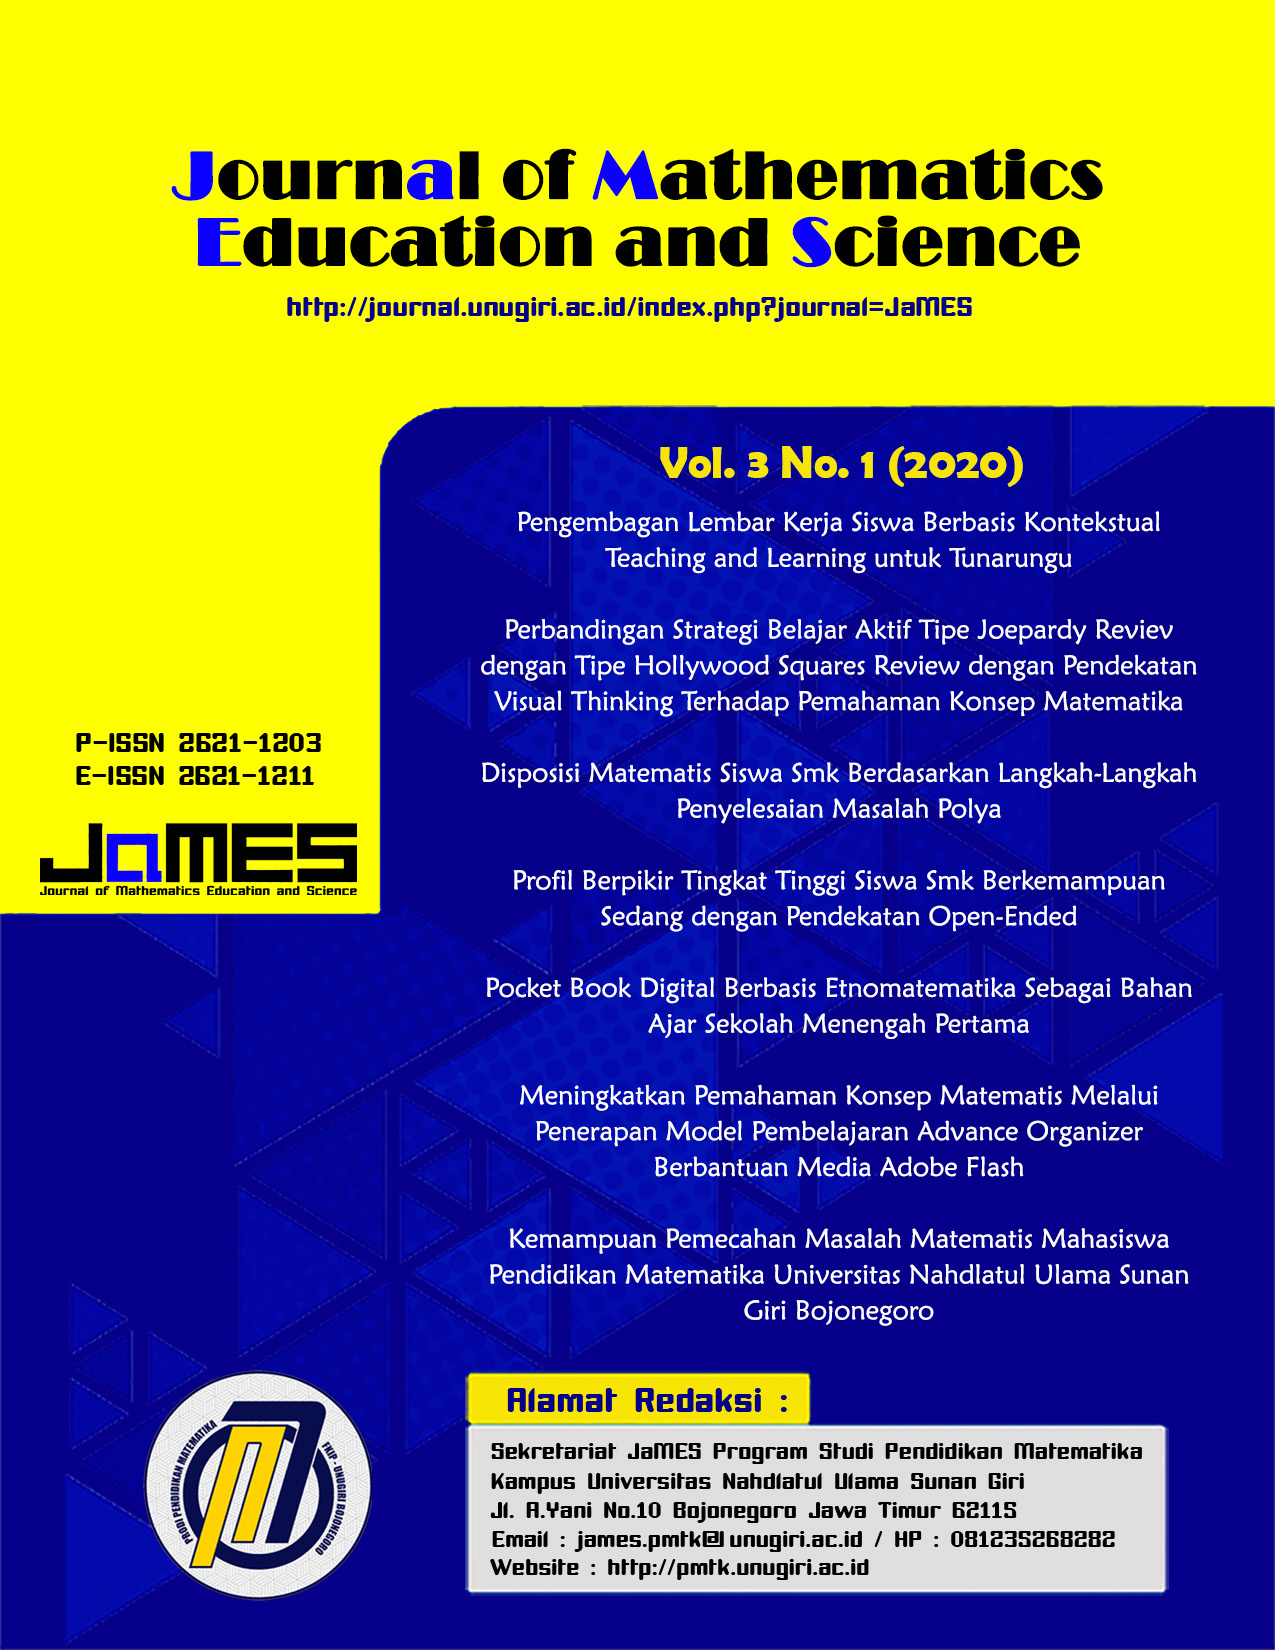 					View Vol. 3 No. 1 (2020): Journal of Mathematics Education and Science
				